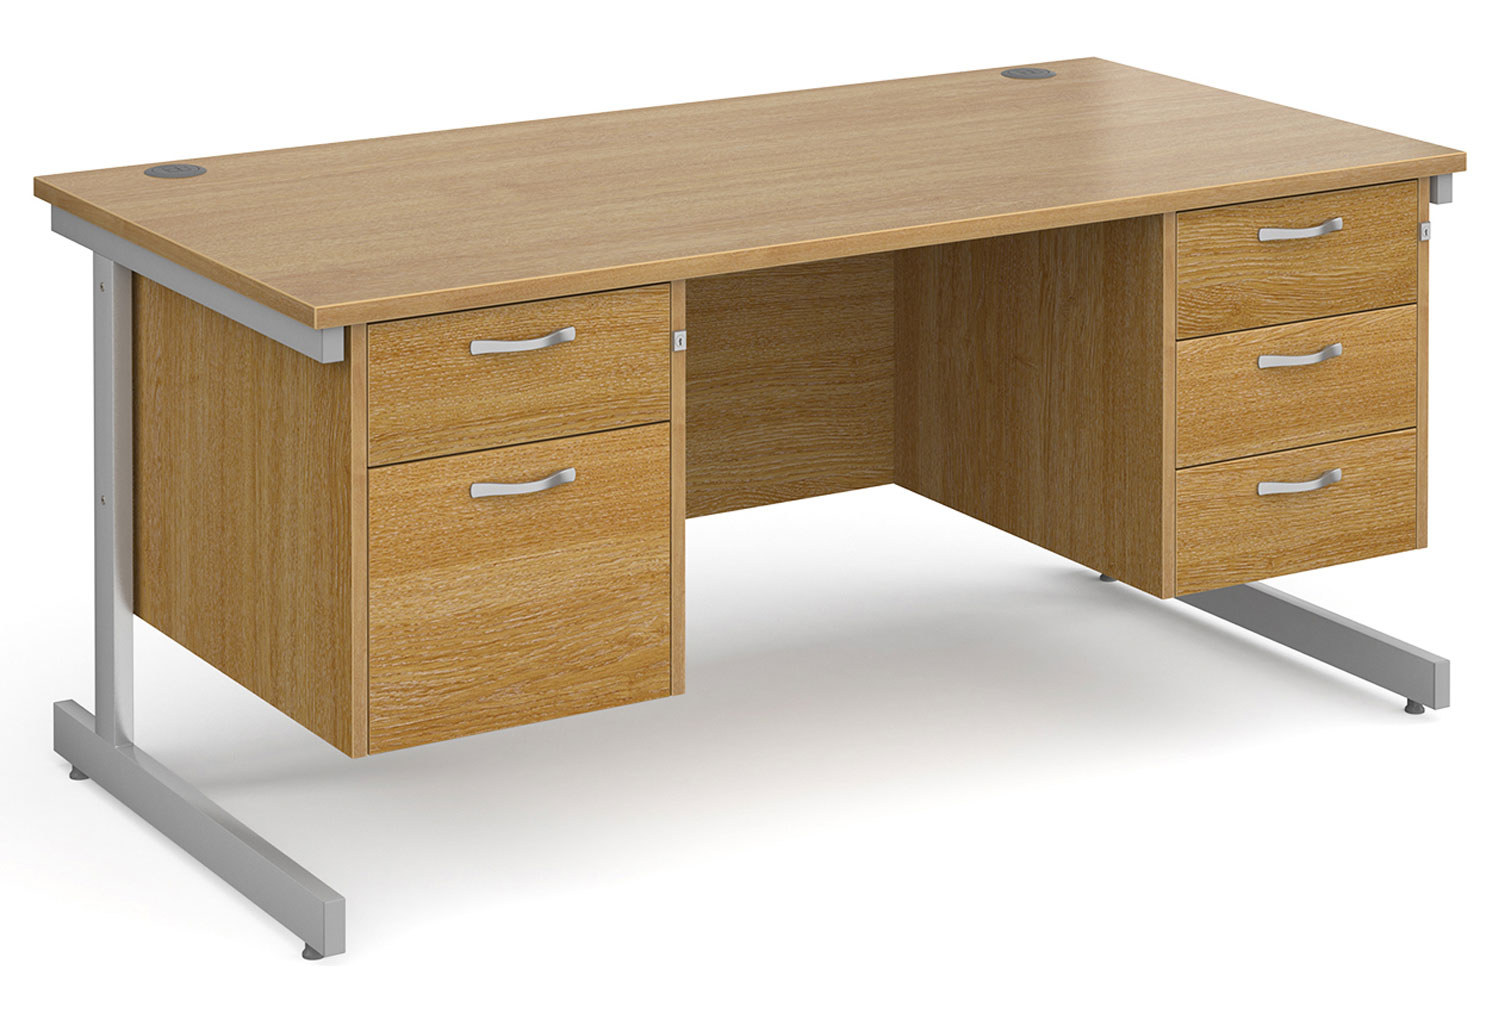 Thrifty Next-Day Rectangular Office Desk 2+3 Drawers Oak, 160wx80dx73h (cm), Express Delivery